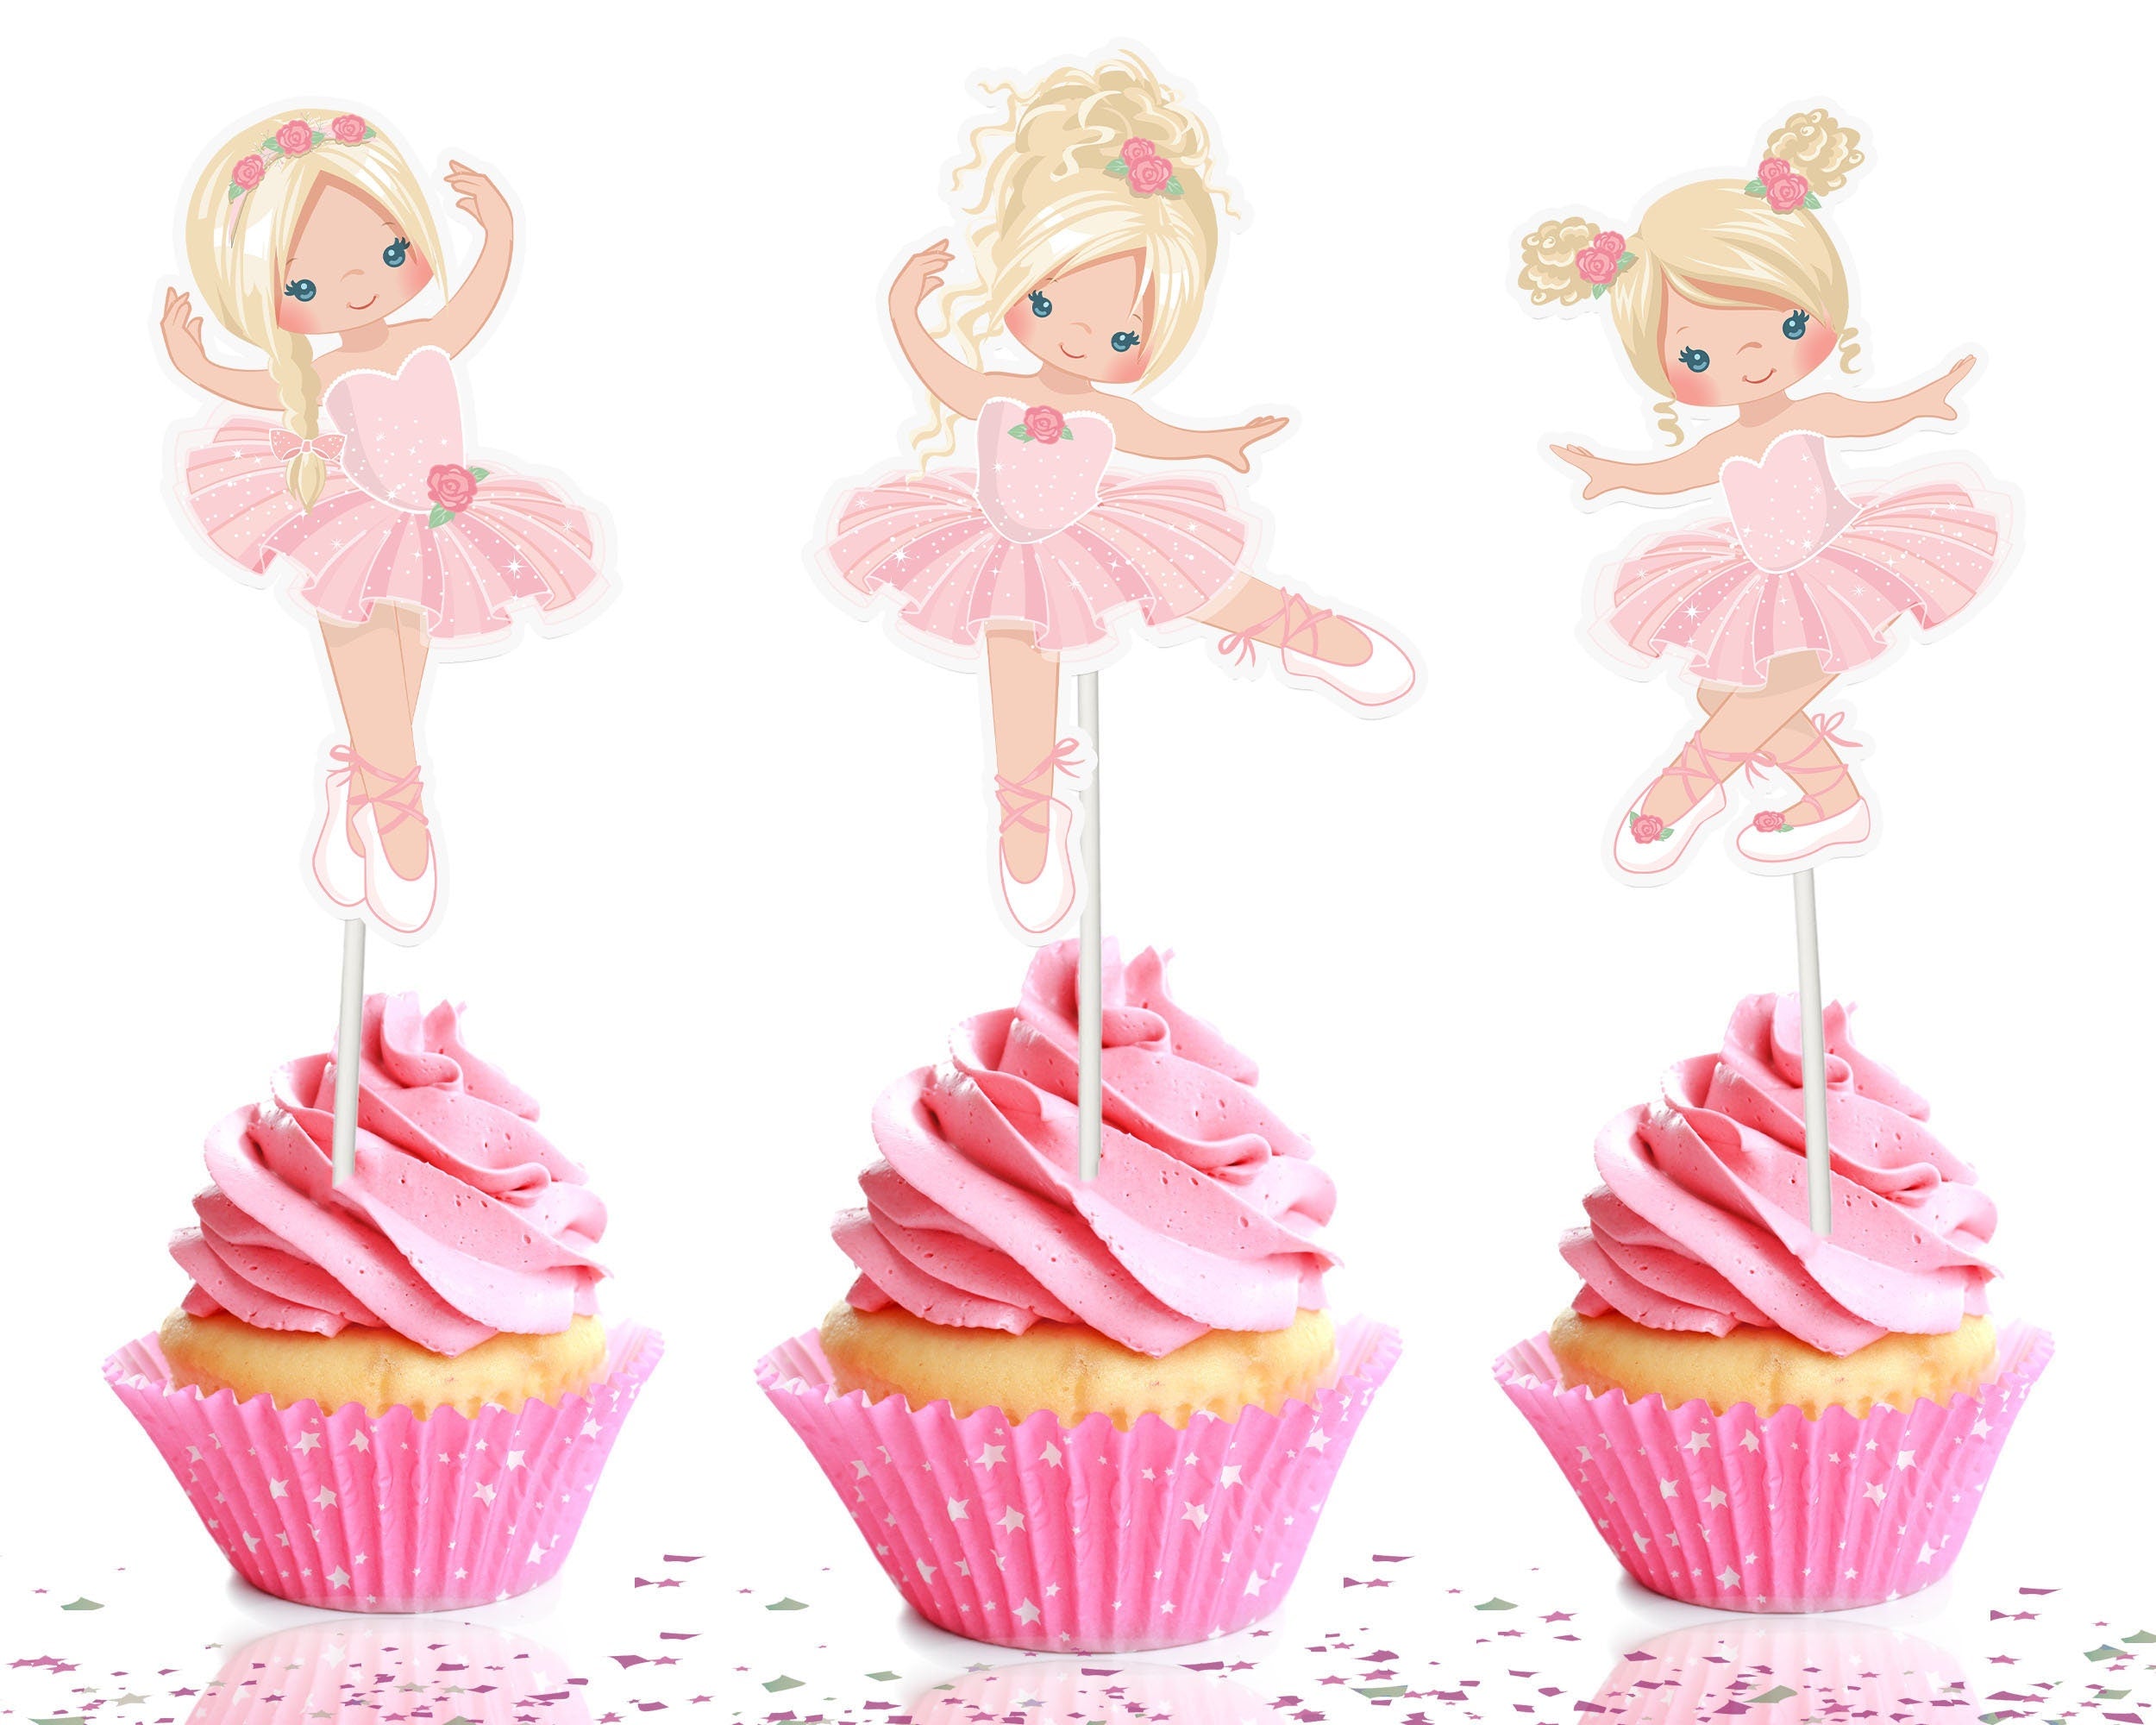 Enchanting Ballerina Cupcake Toppers - Set of 10 Adorable Dancer Decorations for Birthday and Theme Parties